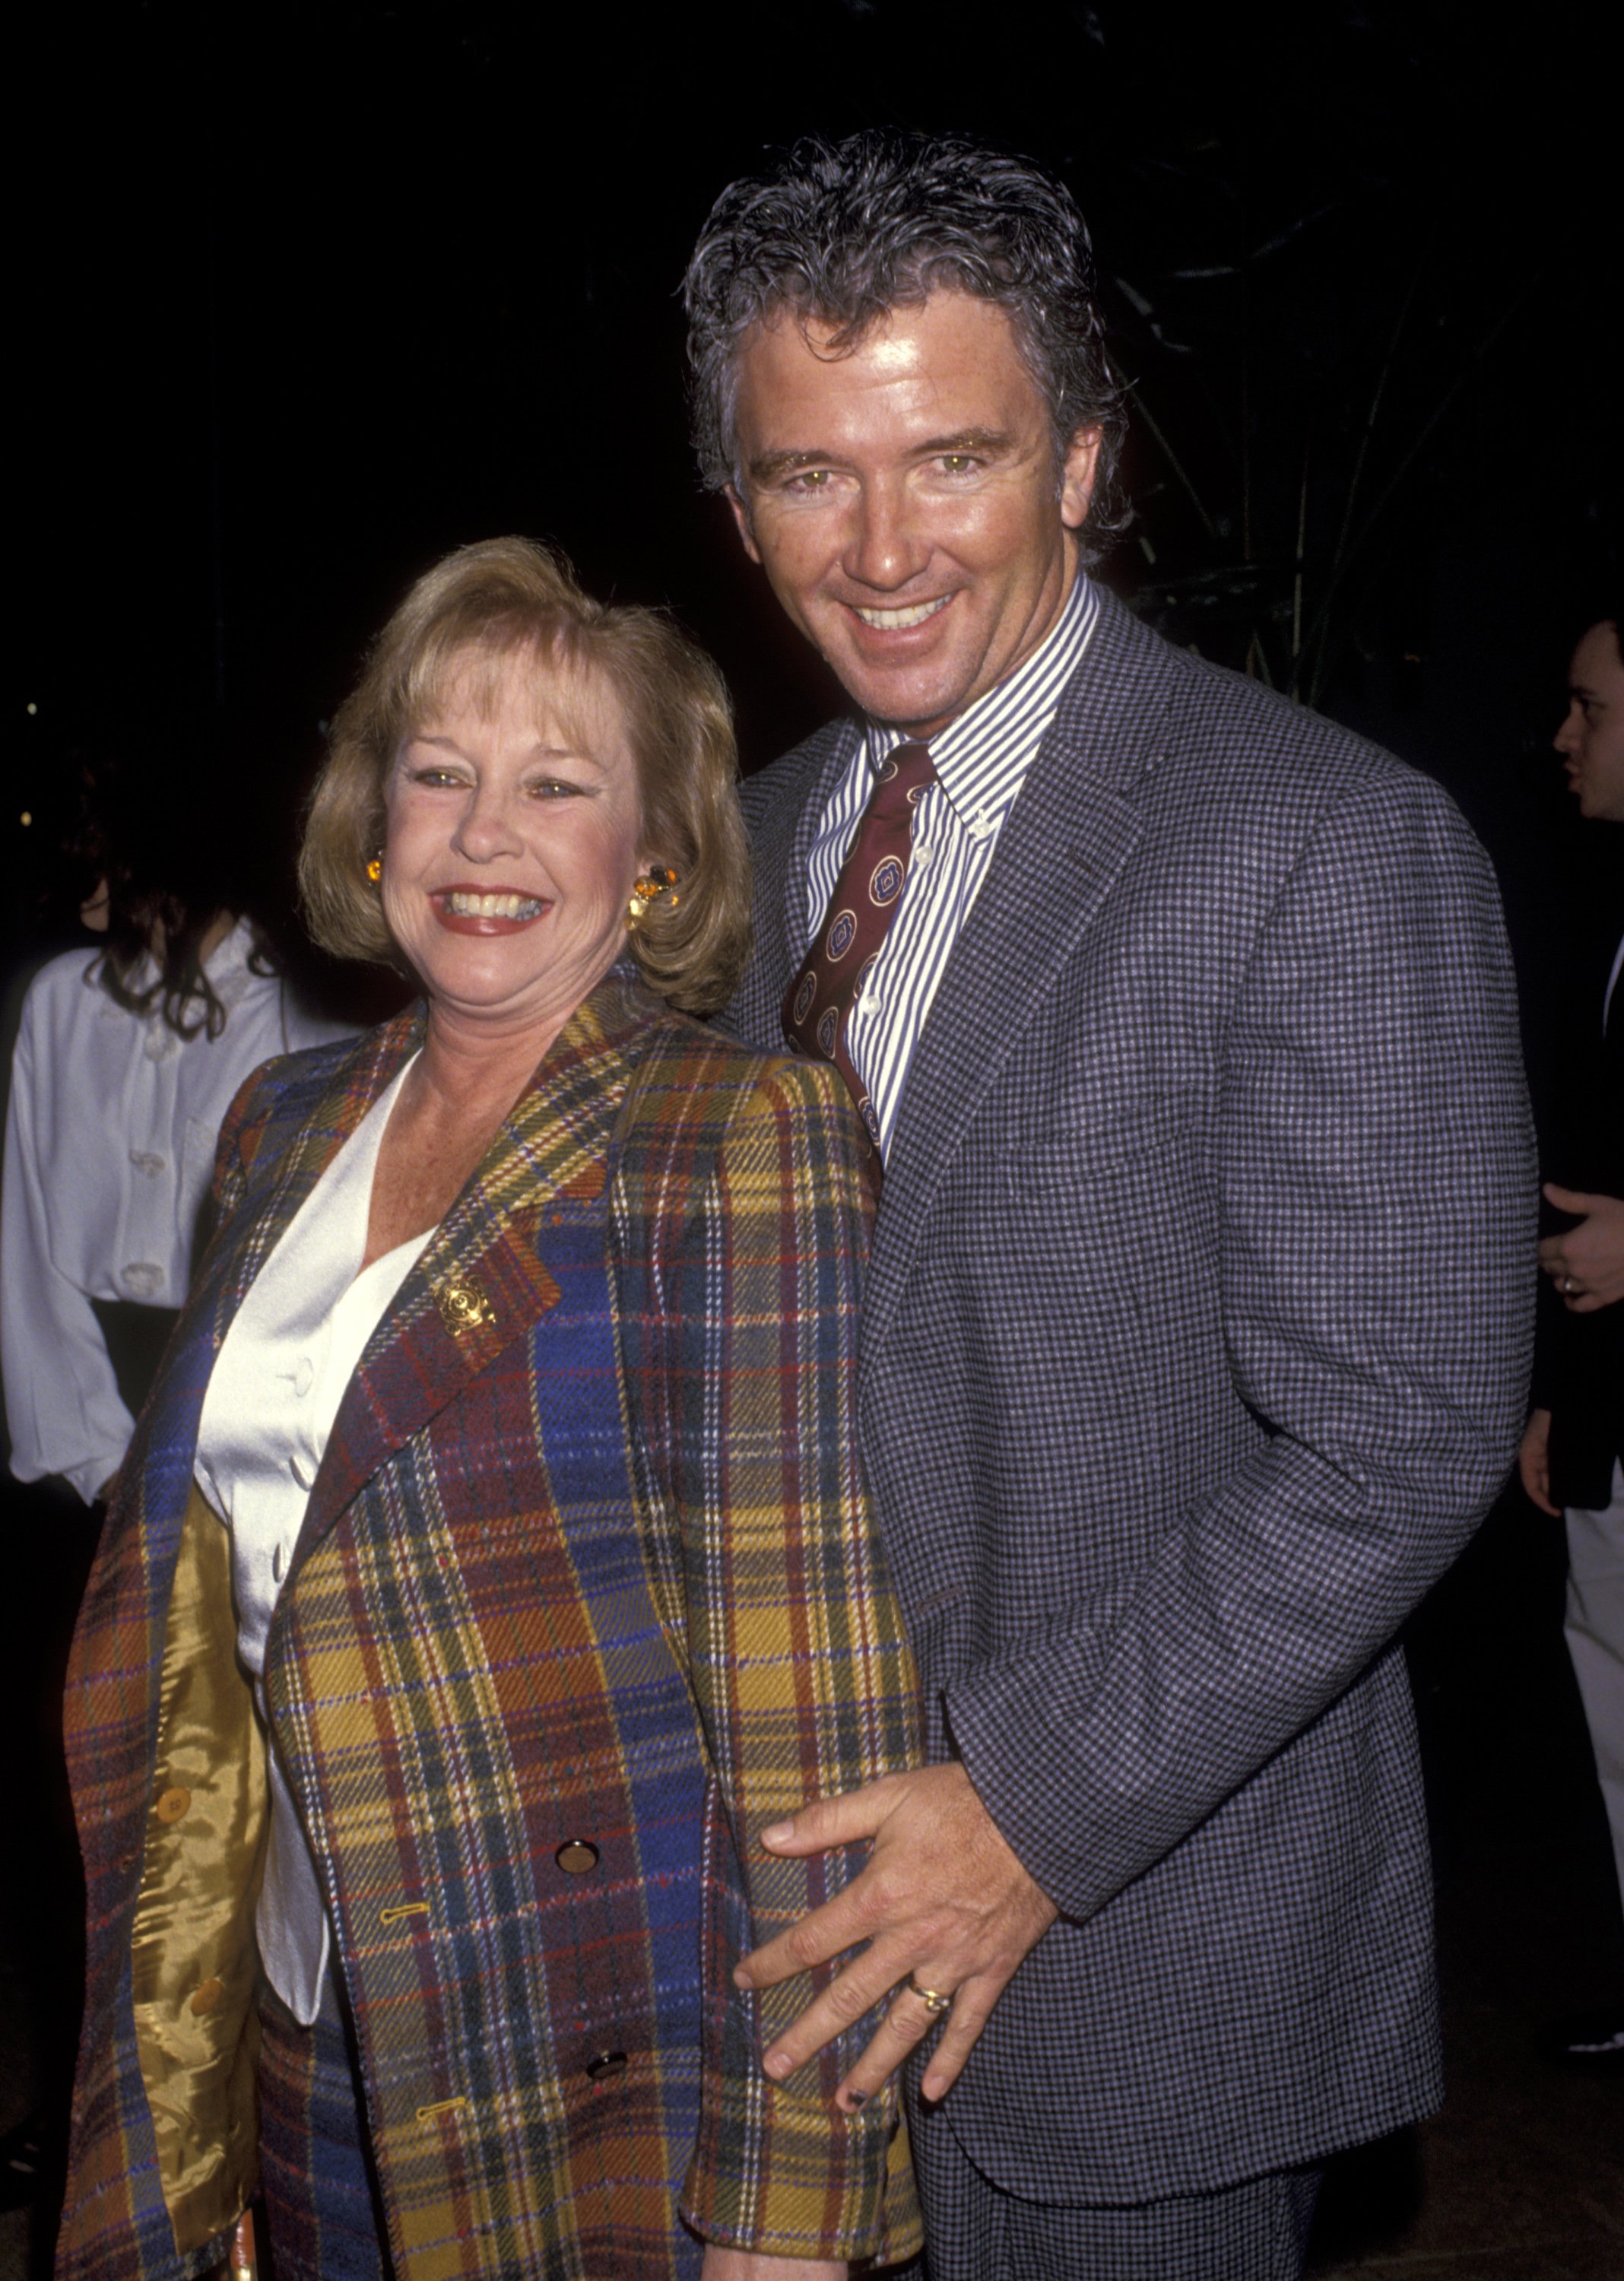 Patrick Duffy and Carlyn Rosser in Beverly Hills 1994 | Source: Getty Images 